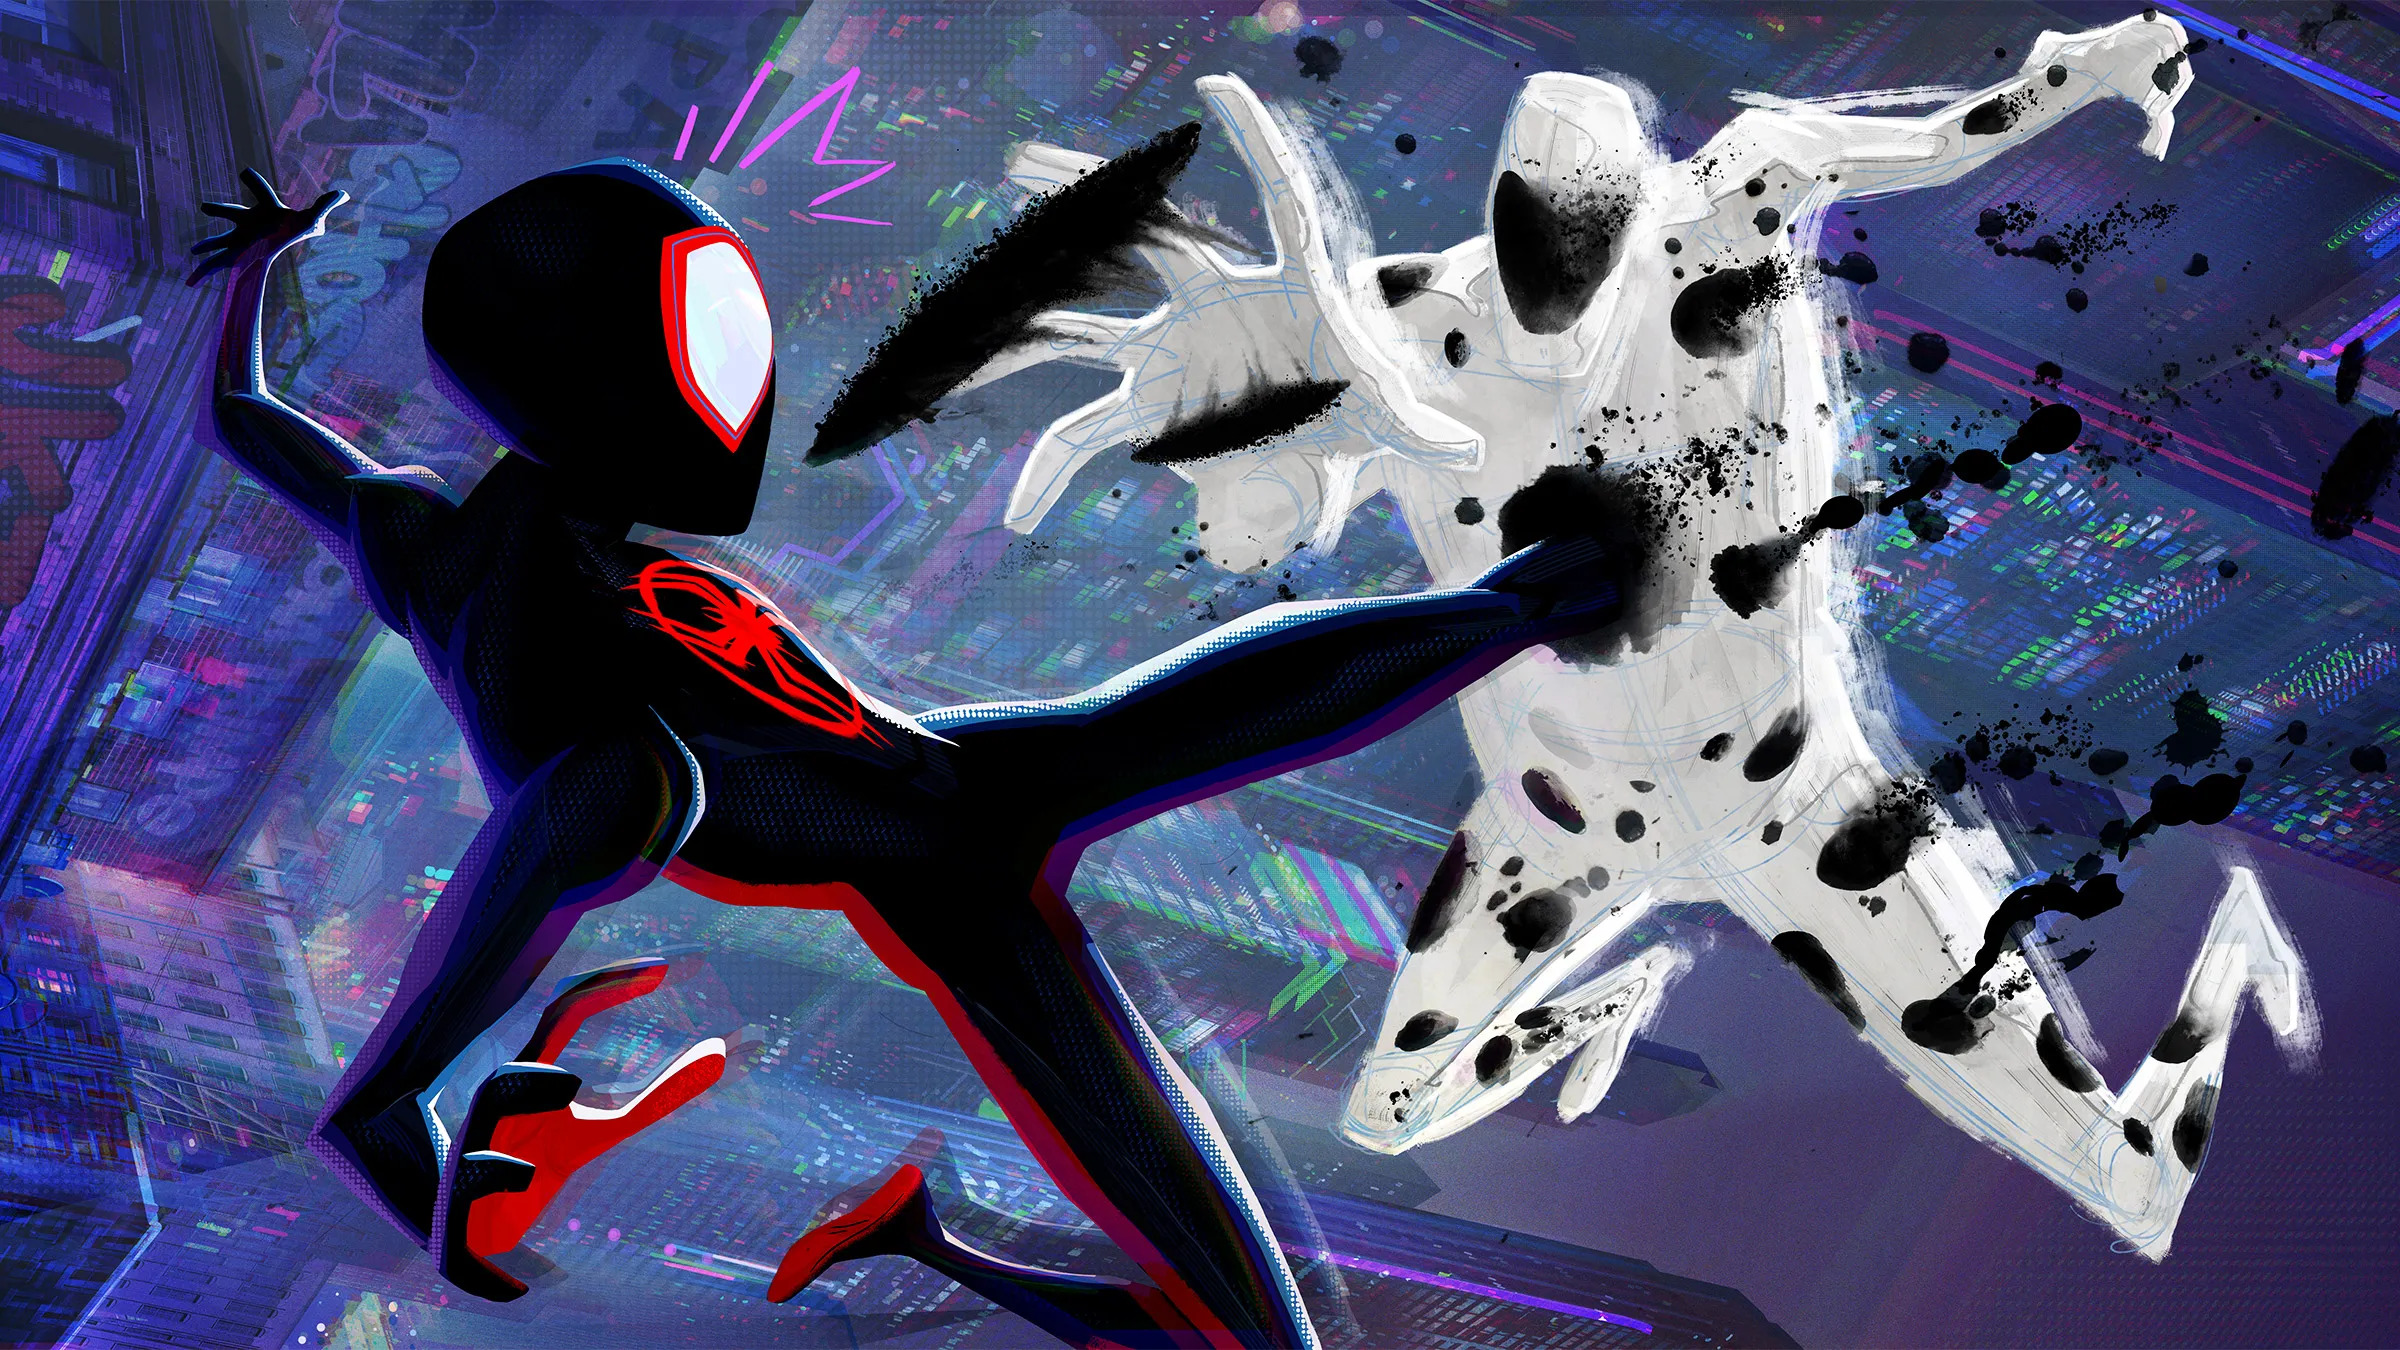 Miles Morales and The Spot in "Spider-Man: Across the Spider-Verse"